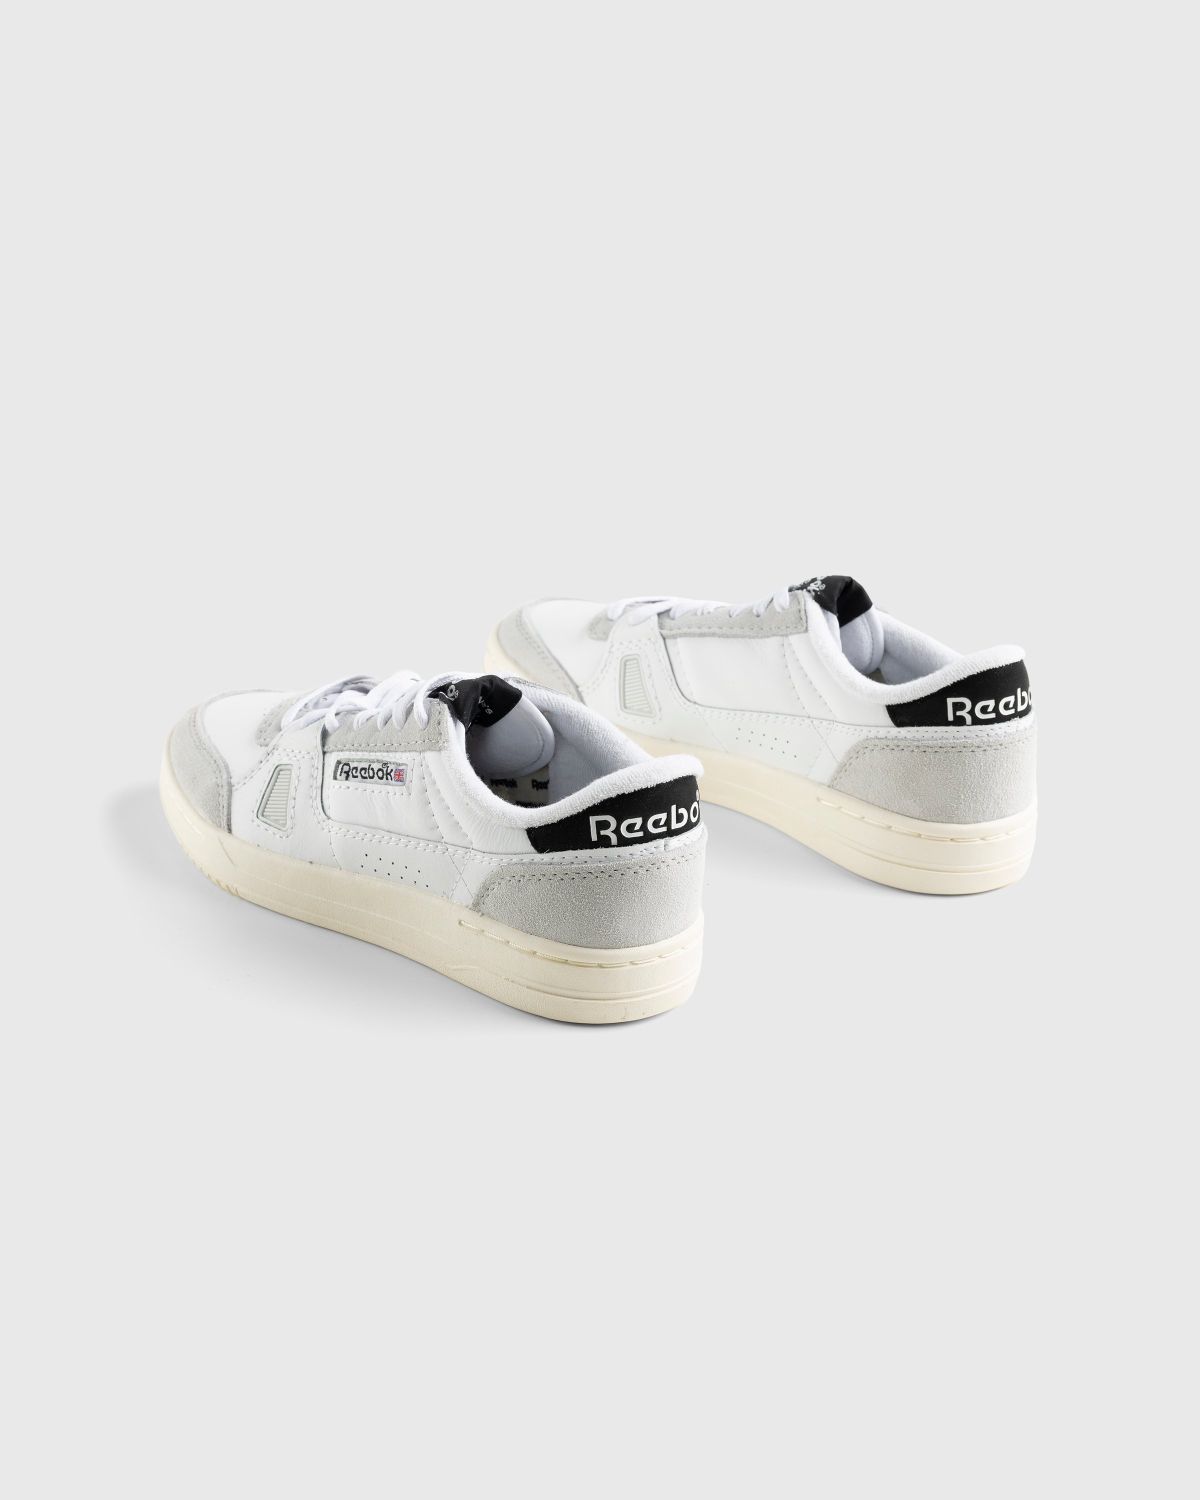 Reebok – LT Court - Low Top Sneakers - White - Image 4